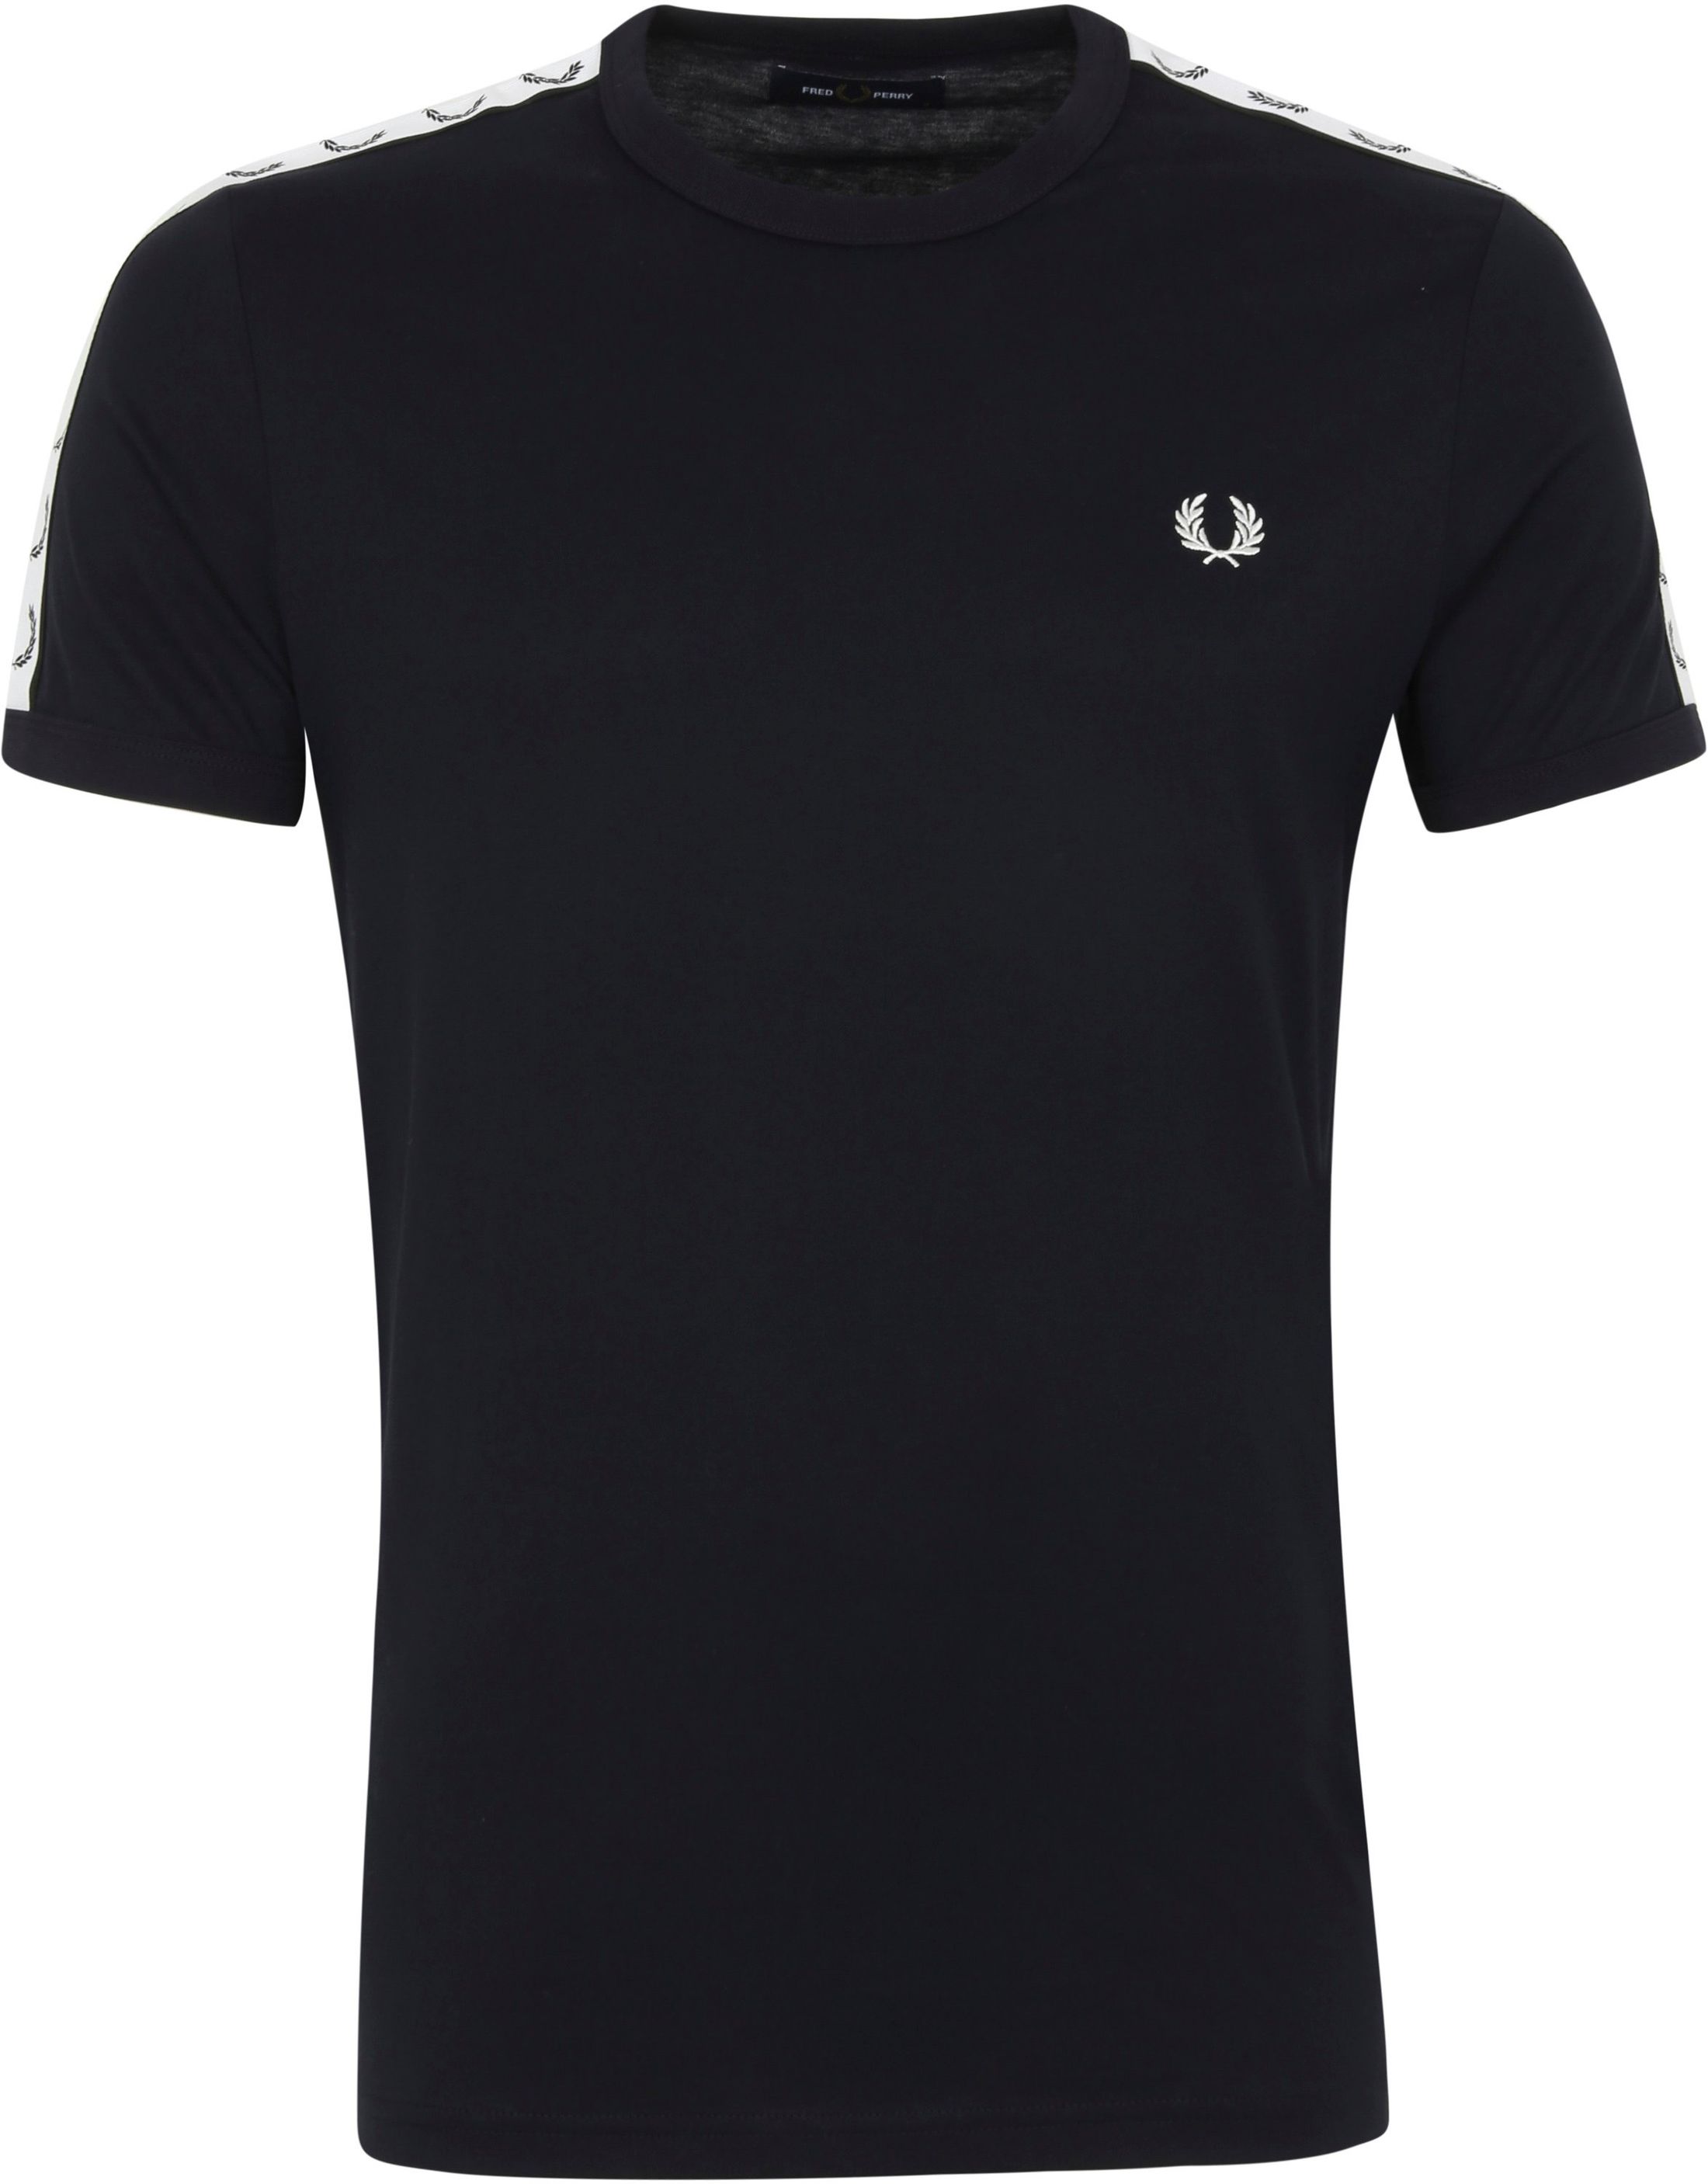 Fred Perry T-Shirt Ringer Navy Blue Dark Blue size L